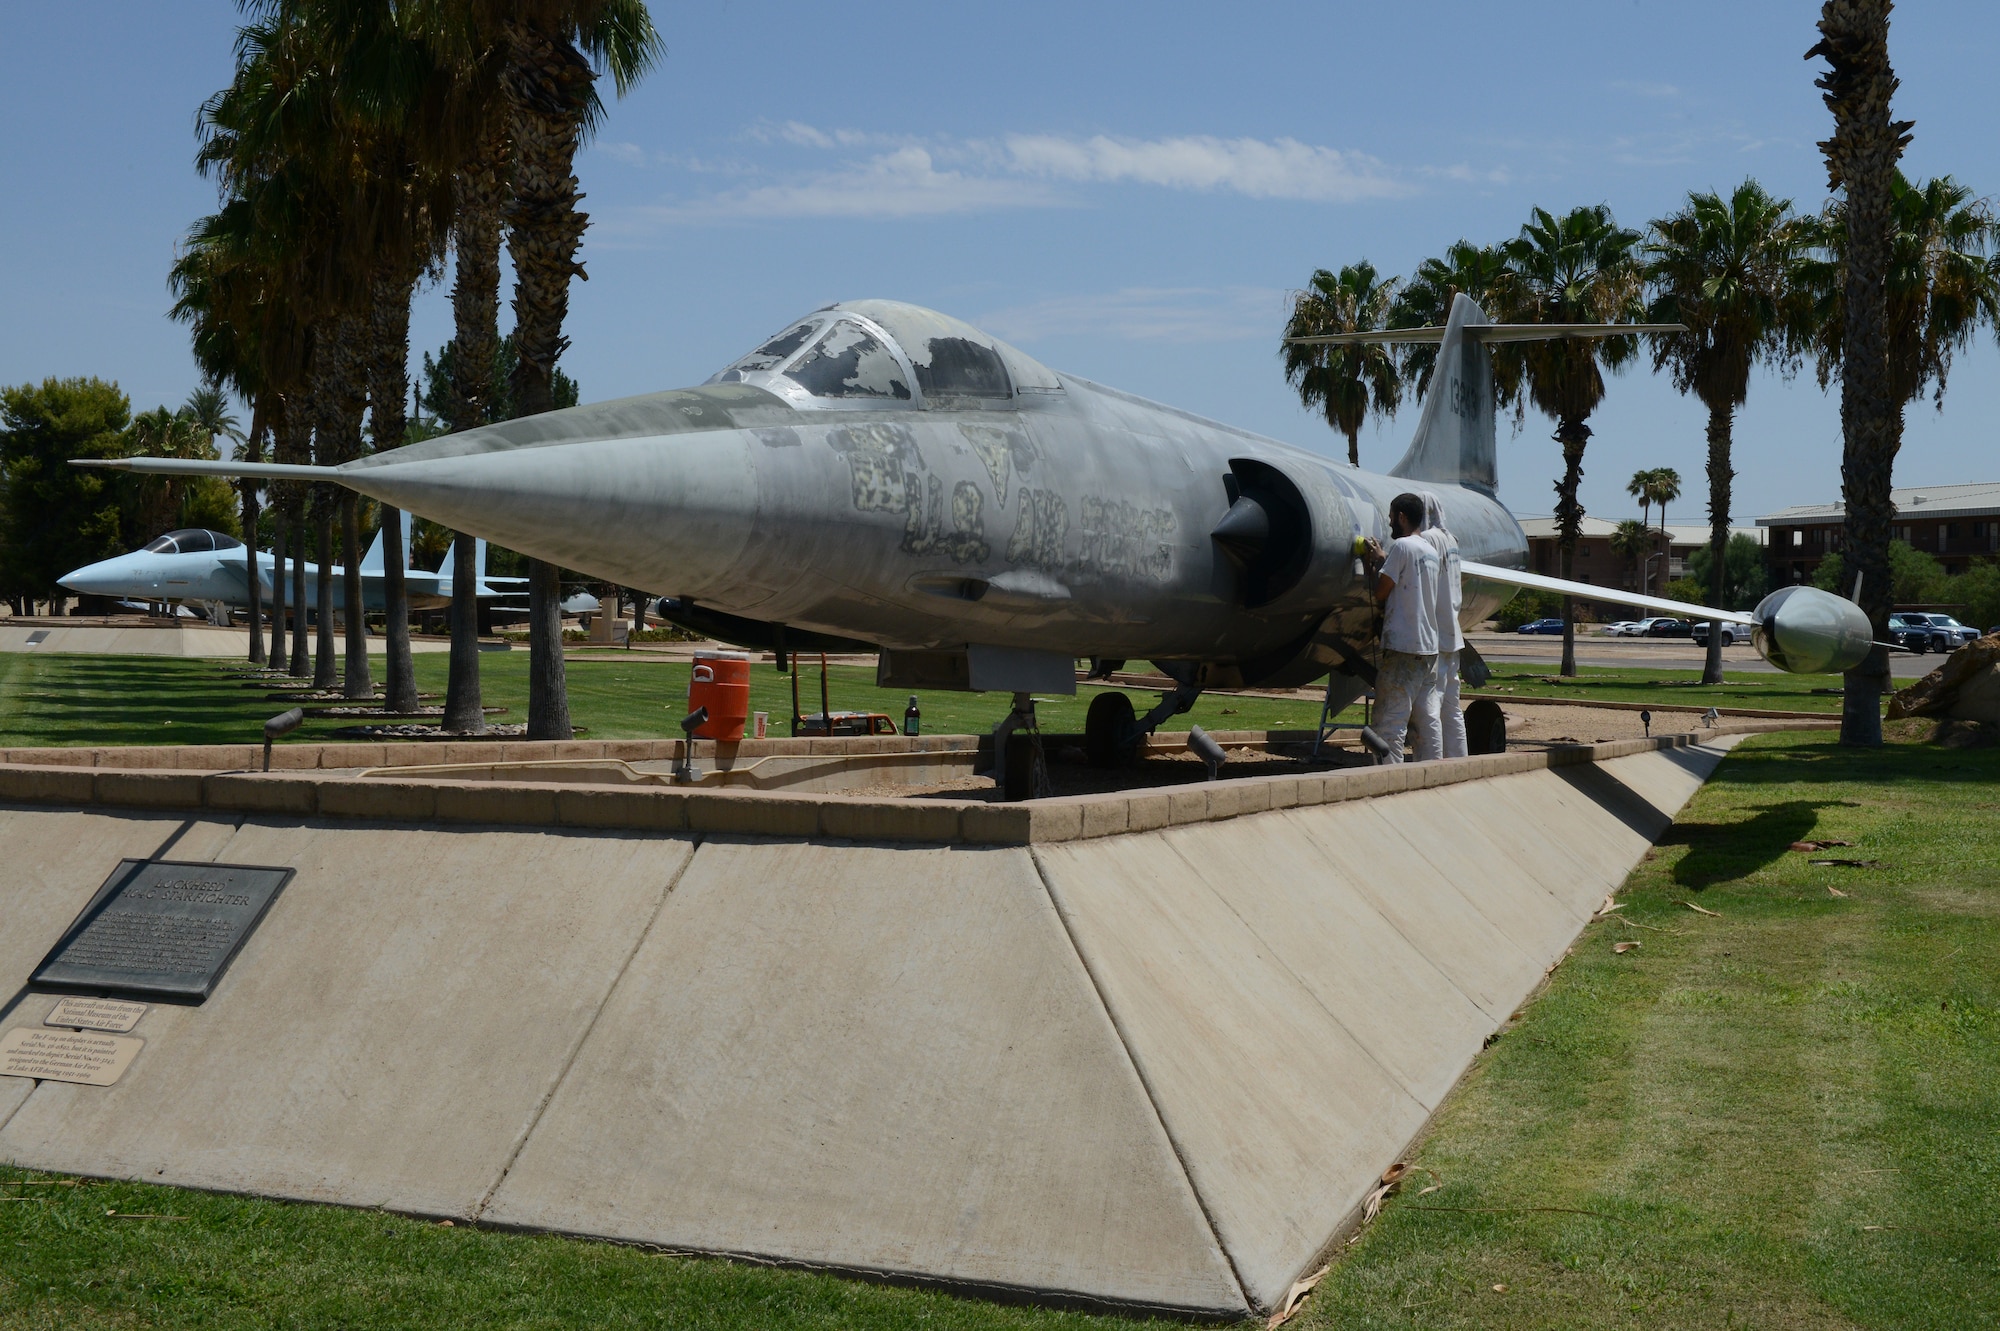 James Bridges and Hayden Yager, civilian contractors, prepare the F-104C Starfighter static display for painting at Luke Air Force Base, Arizona, Aug. 12, 2015. All the static displays in the airpark will be repainted and have maintenance performed by the end of the year. (U.S. Air Force photo by Senior Airman James Hensley)